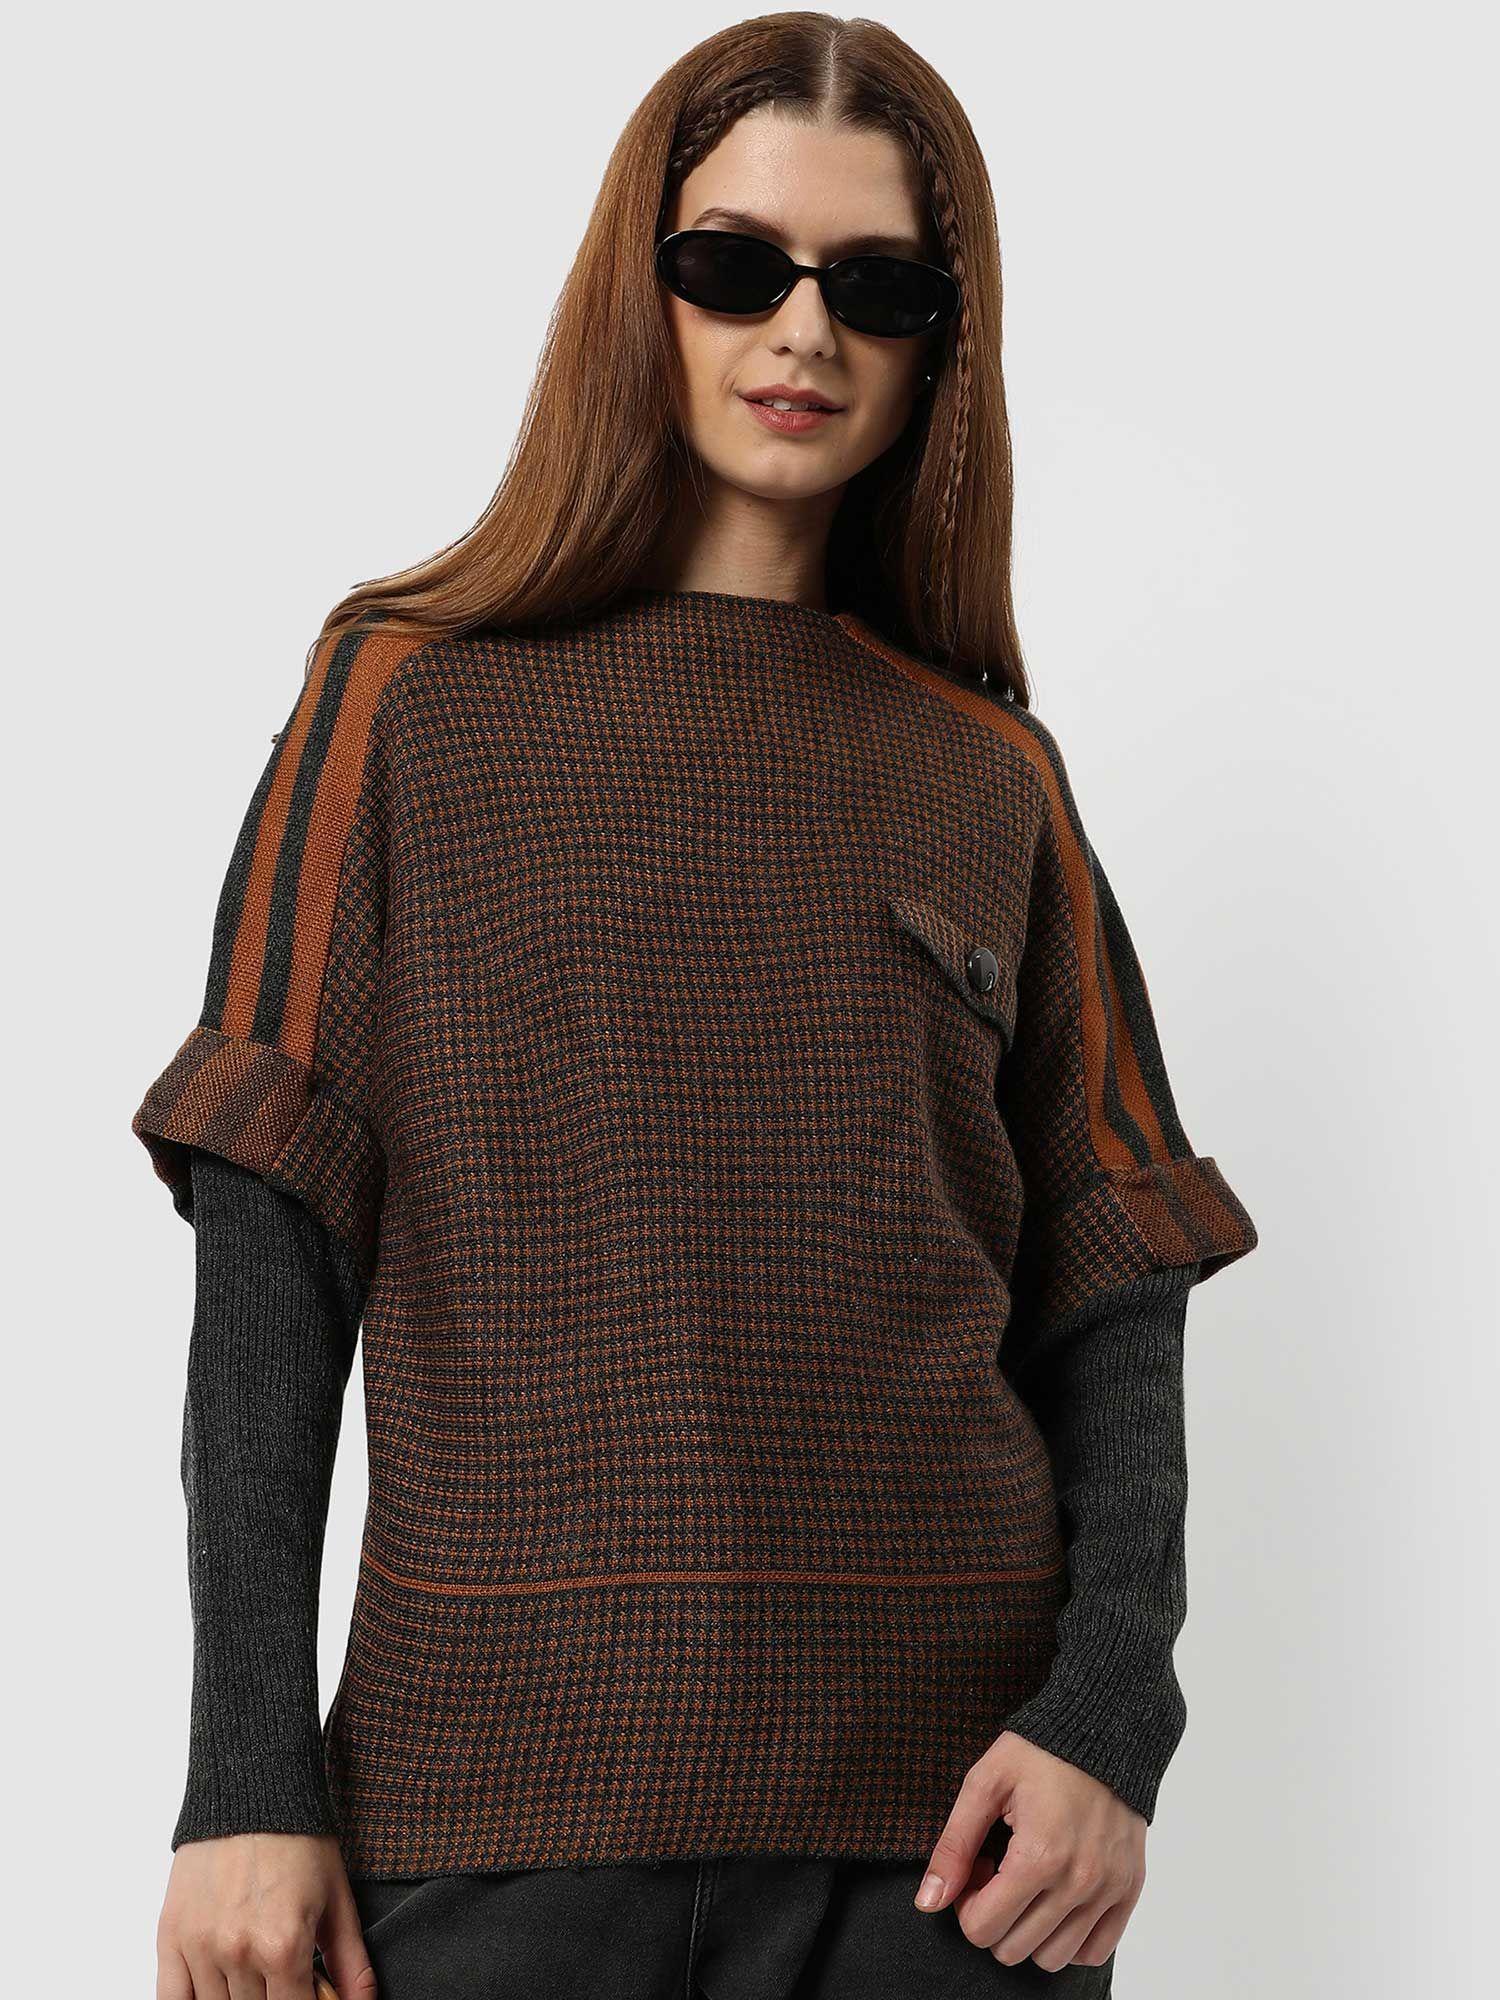 womens-brown-&black-checked-sweater